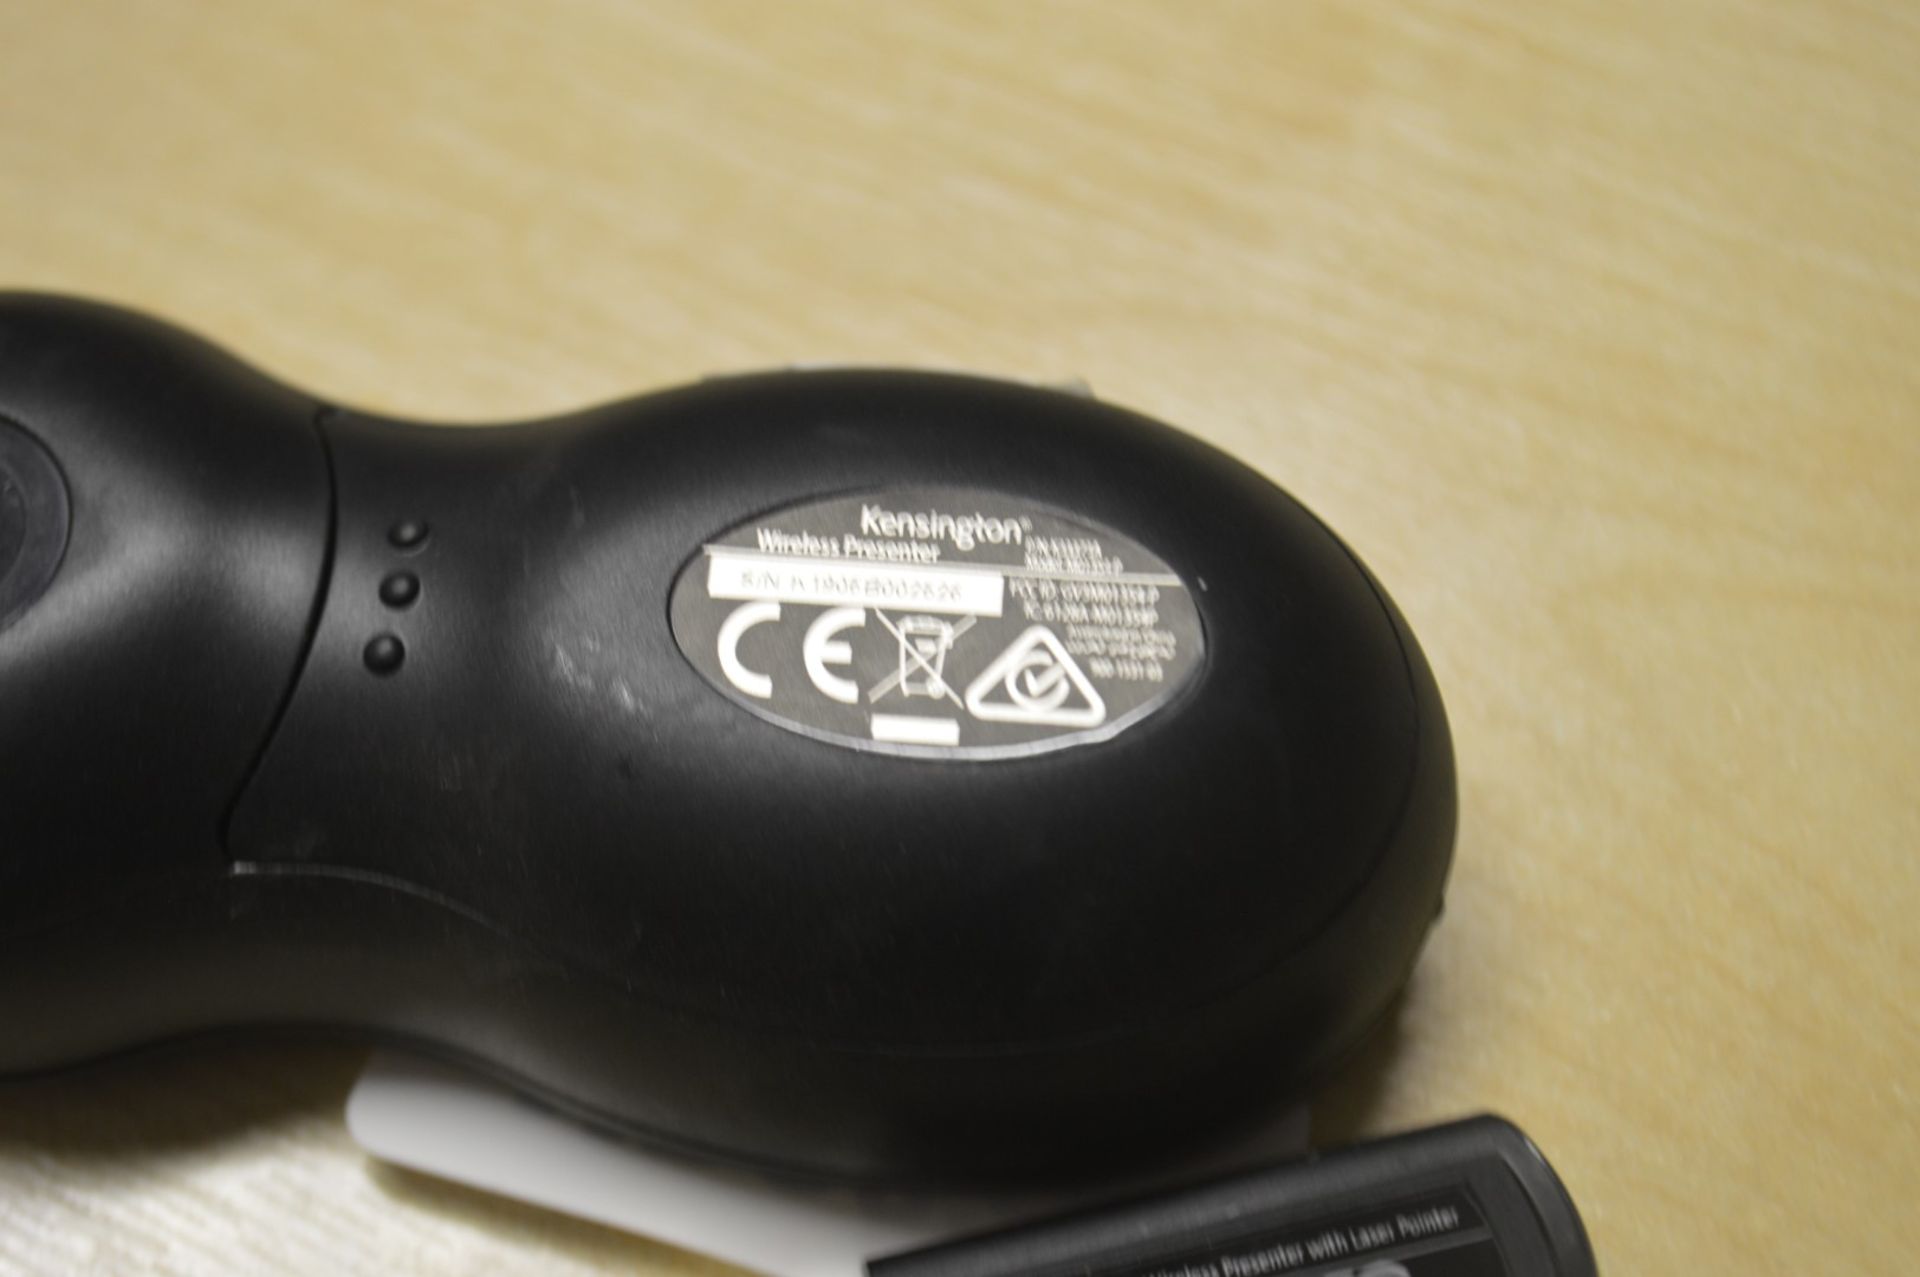 1 x Kensington Wireless Presenter Red Laser With USB Dongle - Ref: MPC822 - CL678 - Location: - Image 3 of 4